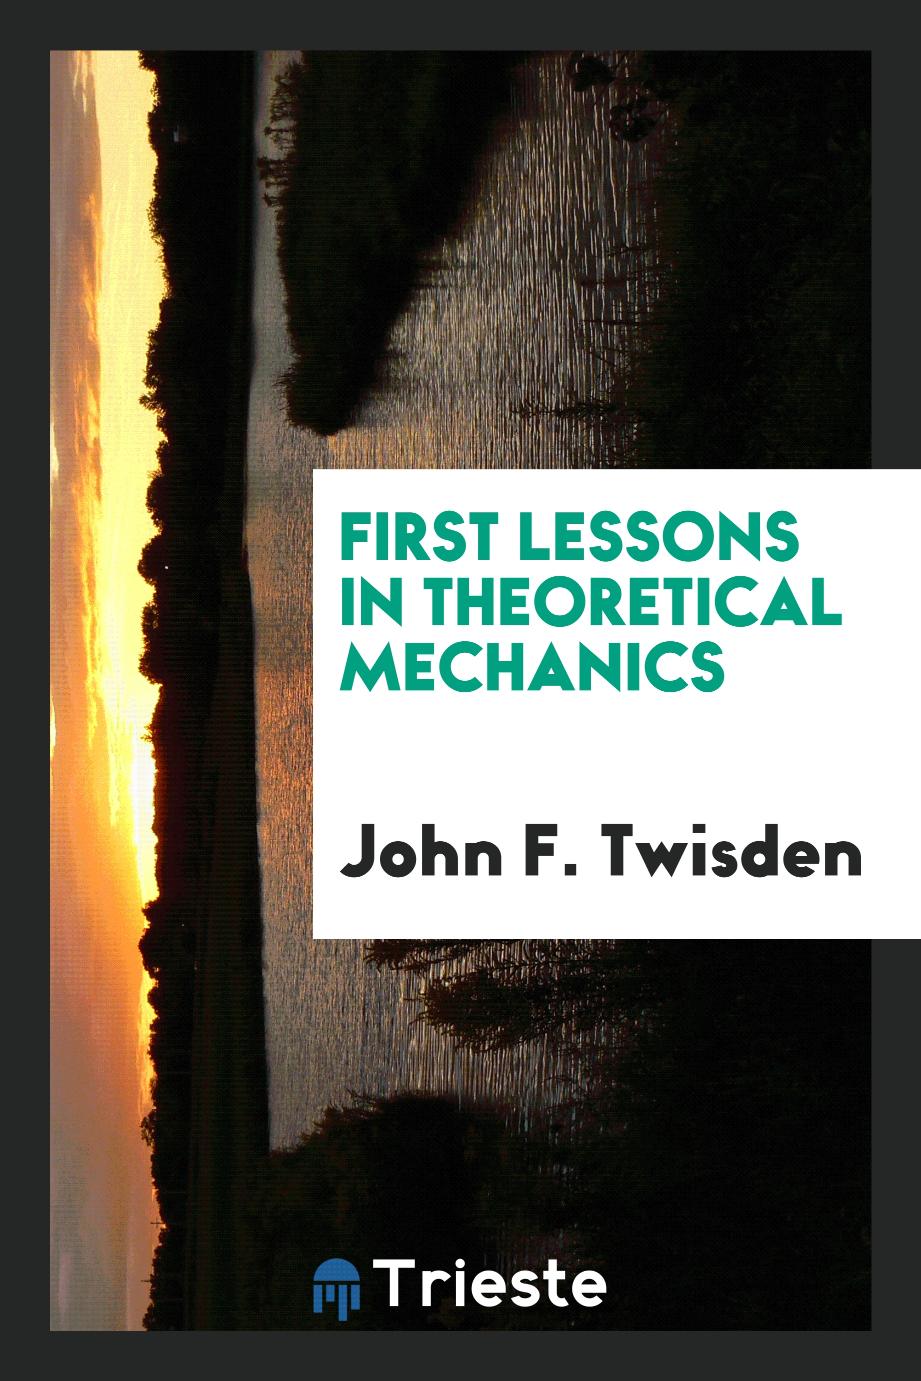 First Lessons in Theoretical Mechanics